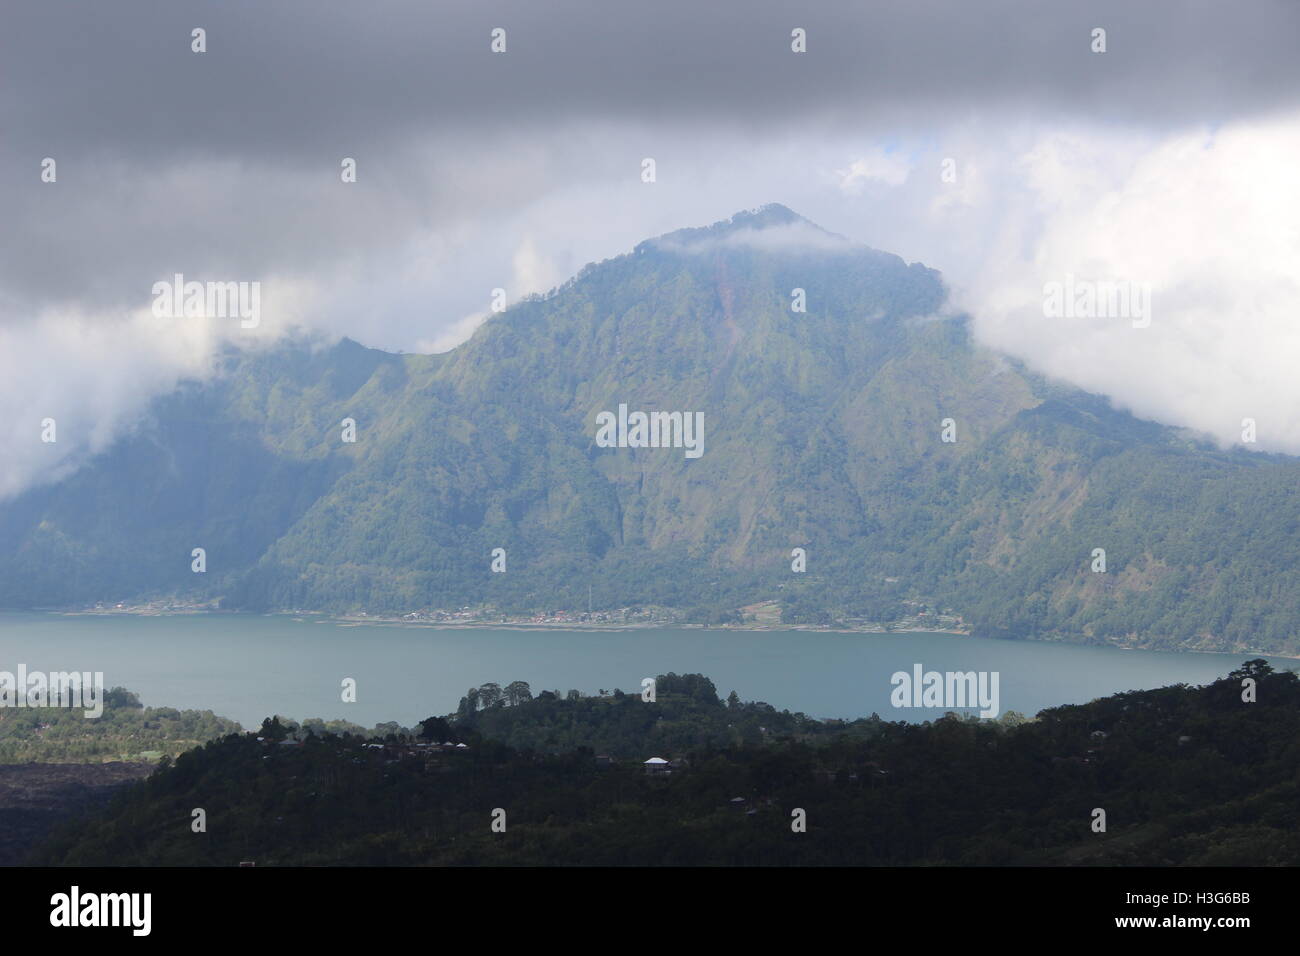 A view of a mountain under the clouds in front of a lake Stock Photo